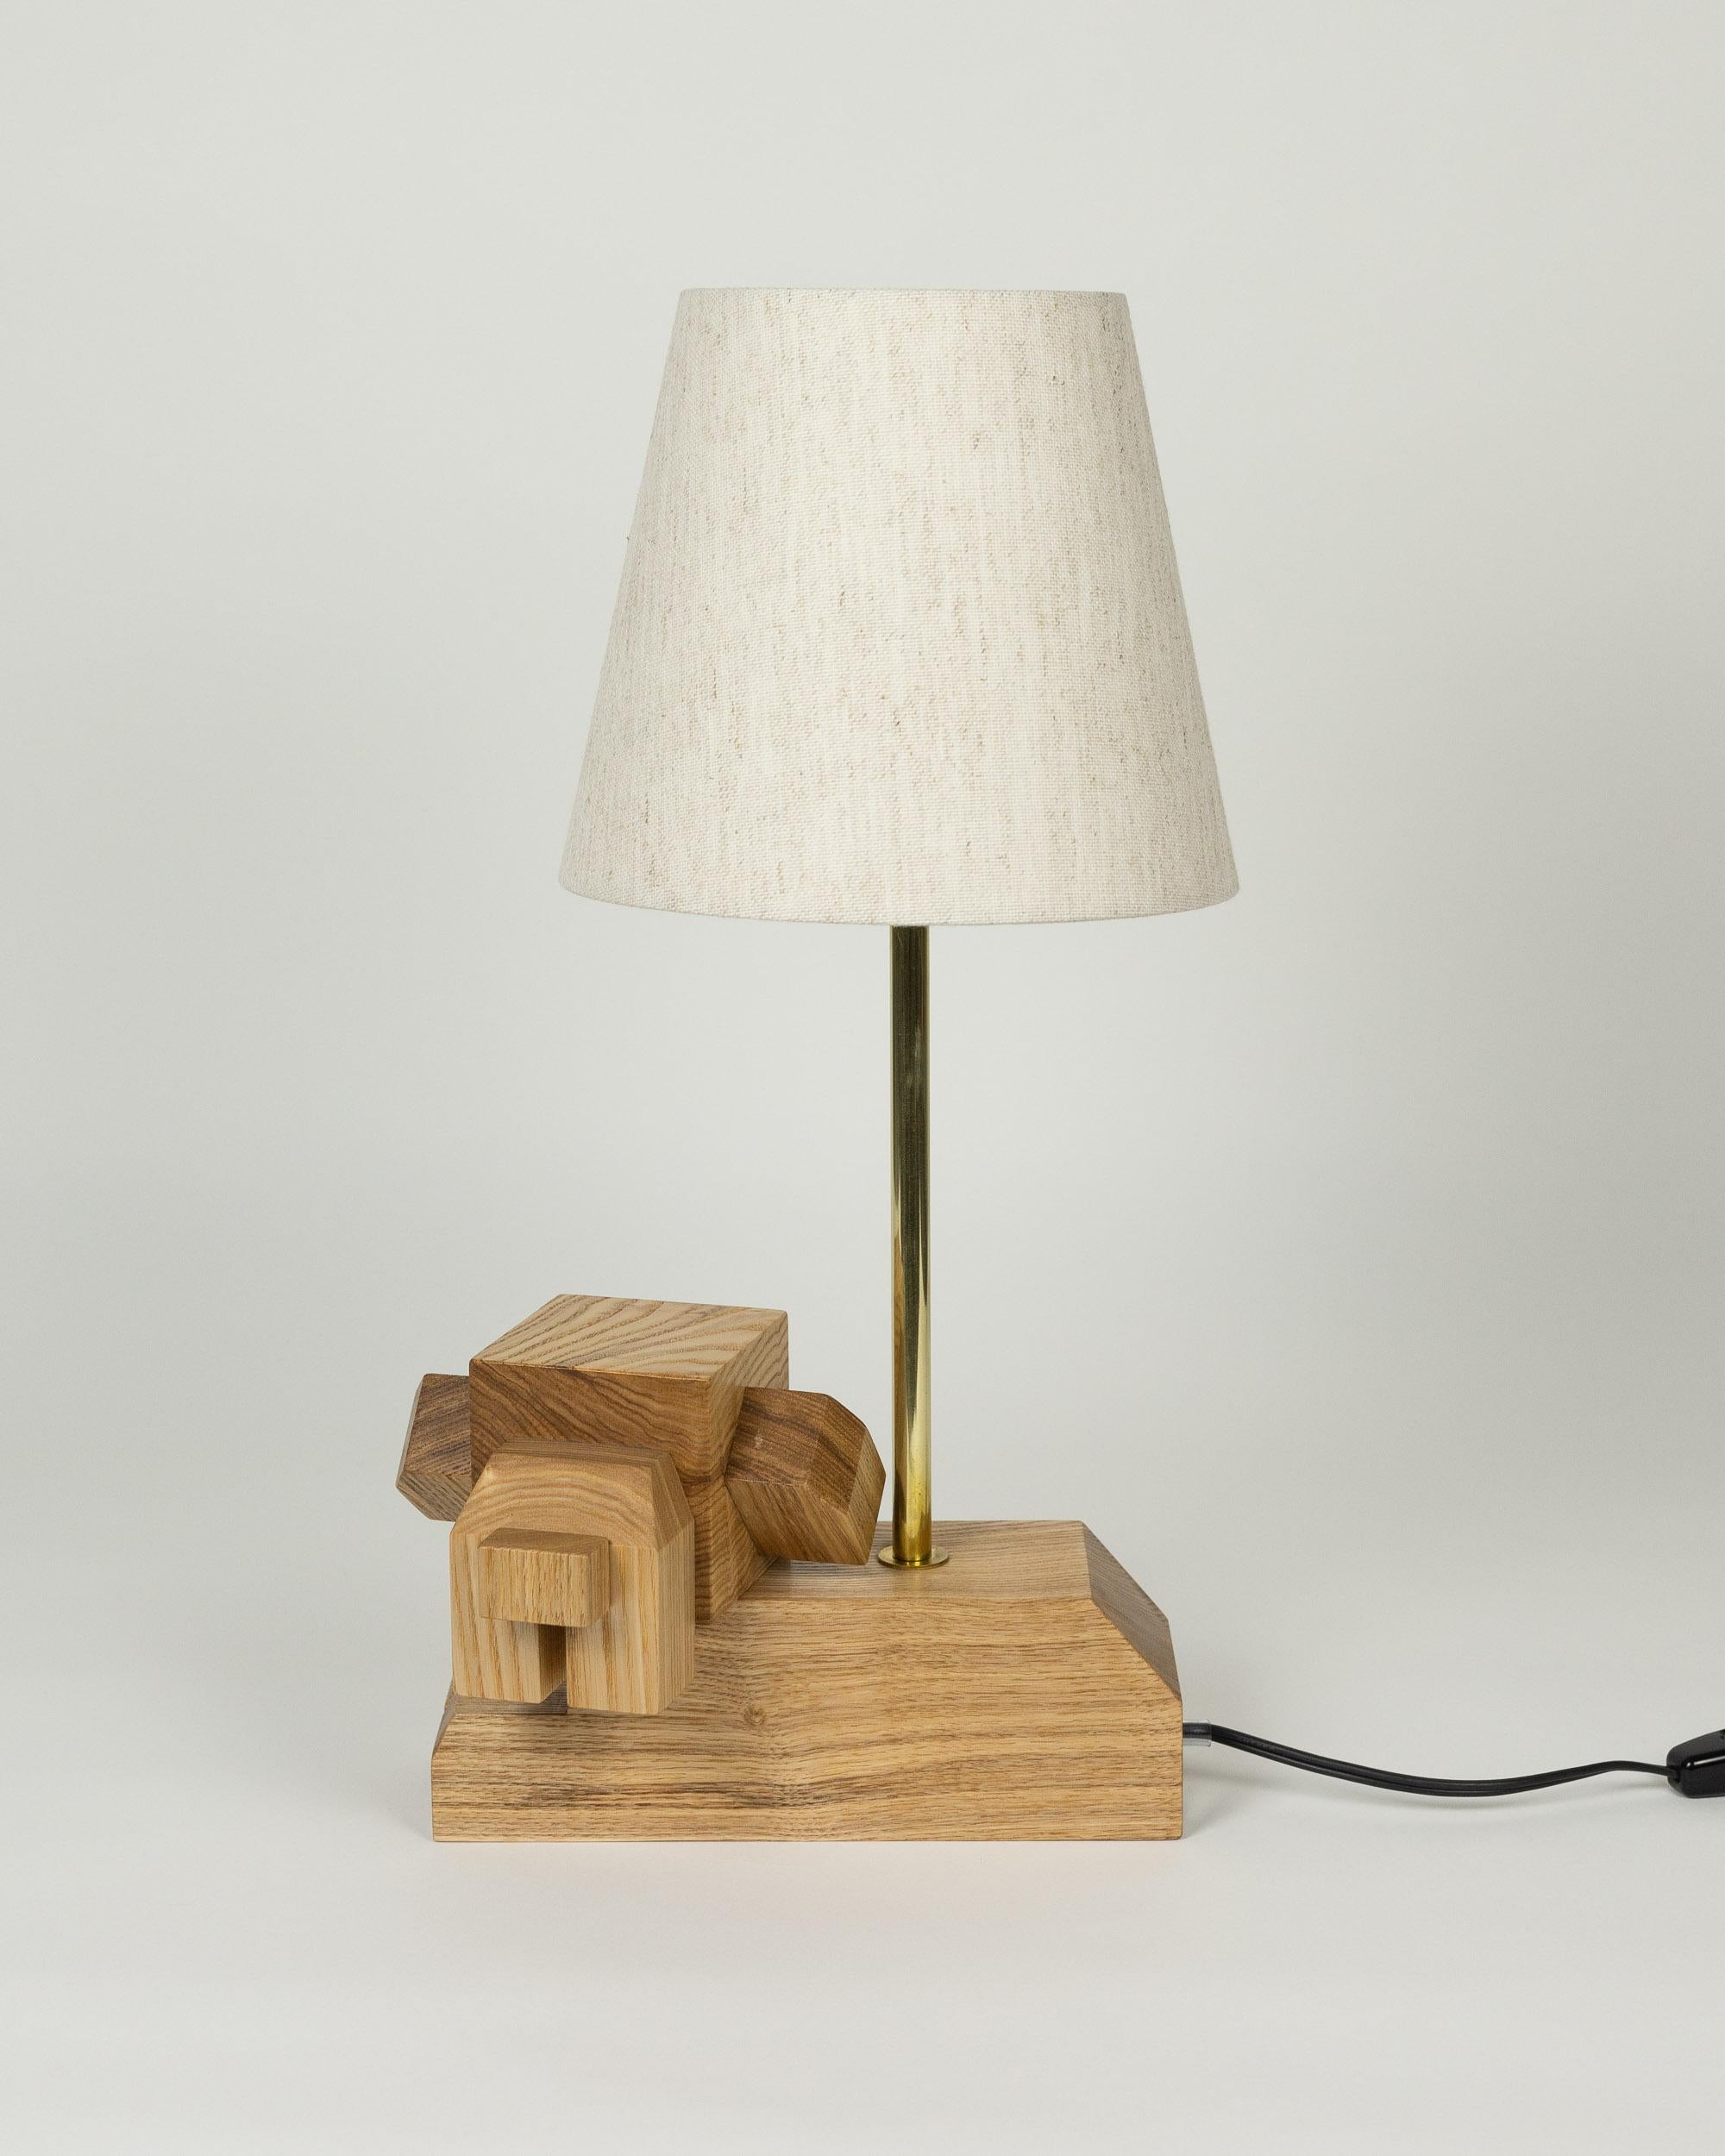 Doggy Lamp by Wan Wan Wonderland (Tokyo, Japan)

Delightful and whimsical table lamp with white pleated shades and expertly hand-crafted black wooden base. Each lamp is hand crafted by WAN(of WAN WAN WONDERLAND), an artist and dog lover, at her